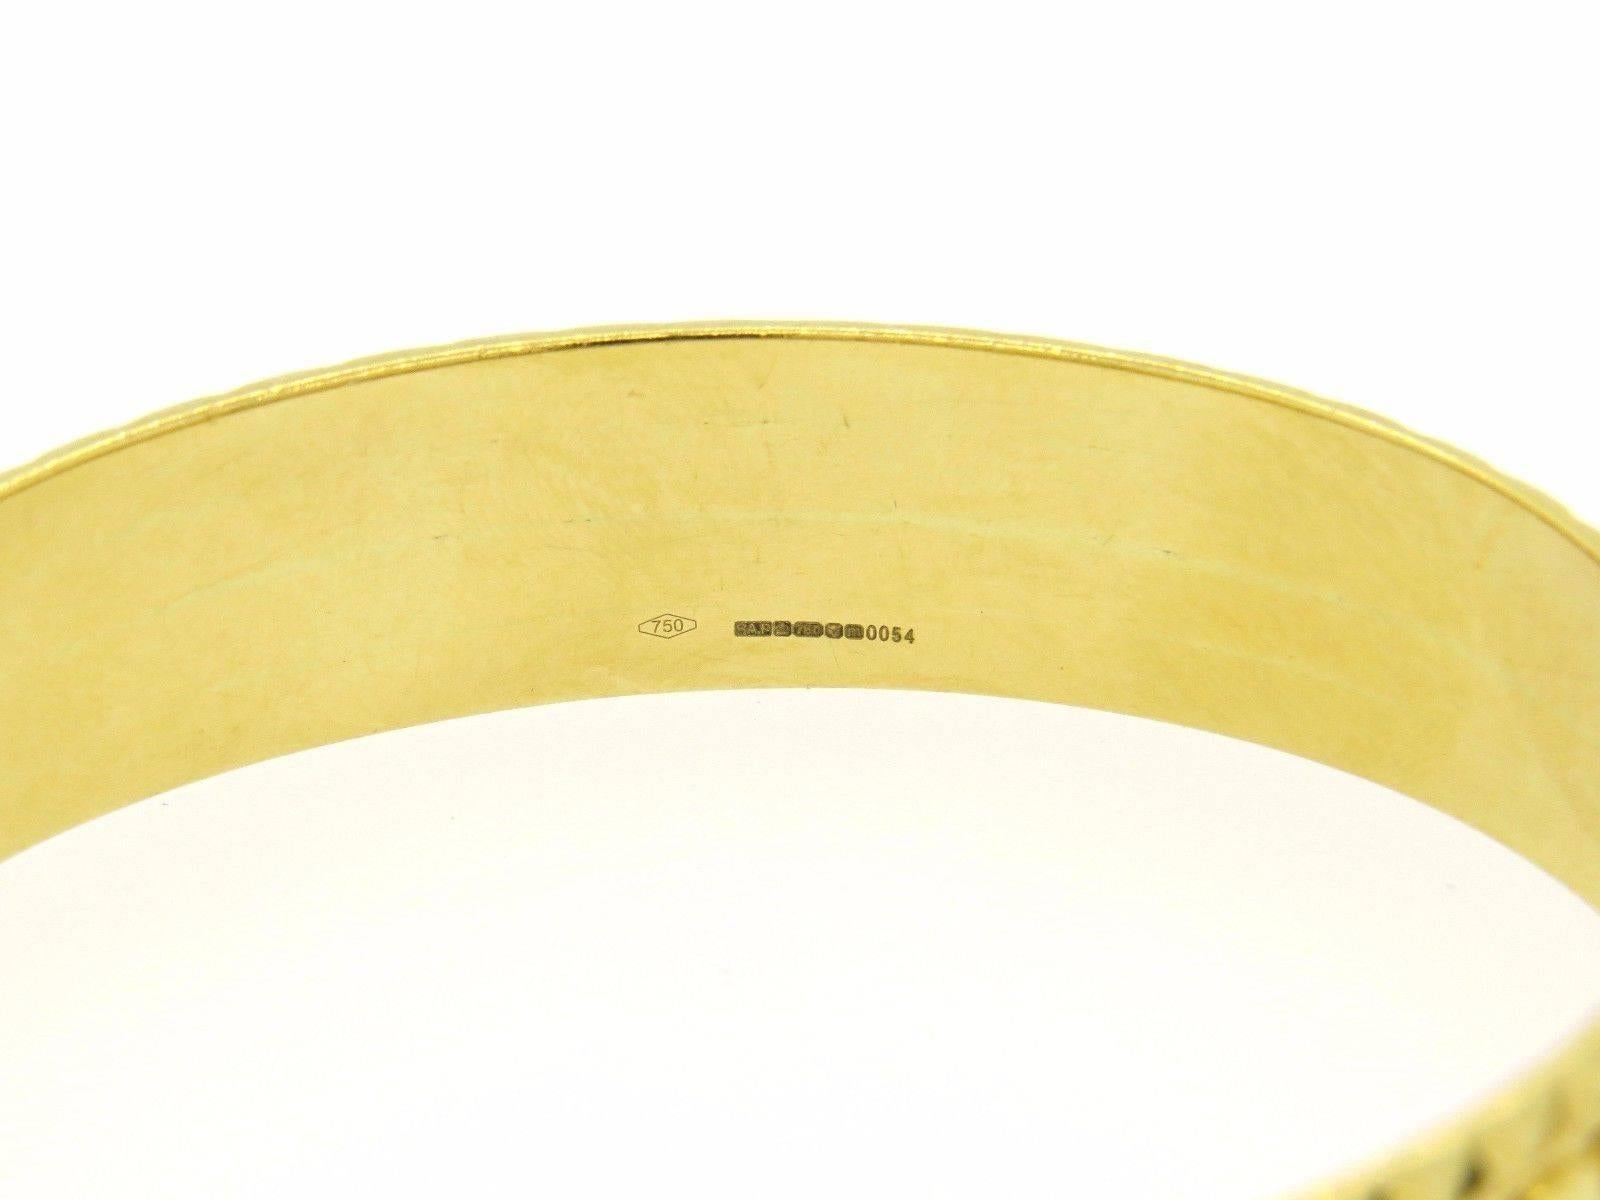 An 18K yellow gold bangle bracelet.  The bangle has interior dimensions of 68mm x 59mm and measures 15mm wide.  The weight of the piece is 62.9 grams. 